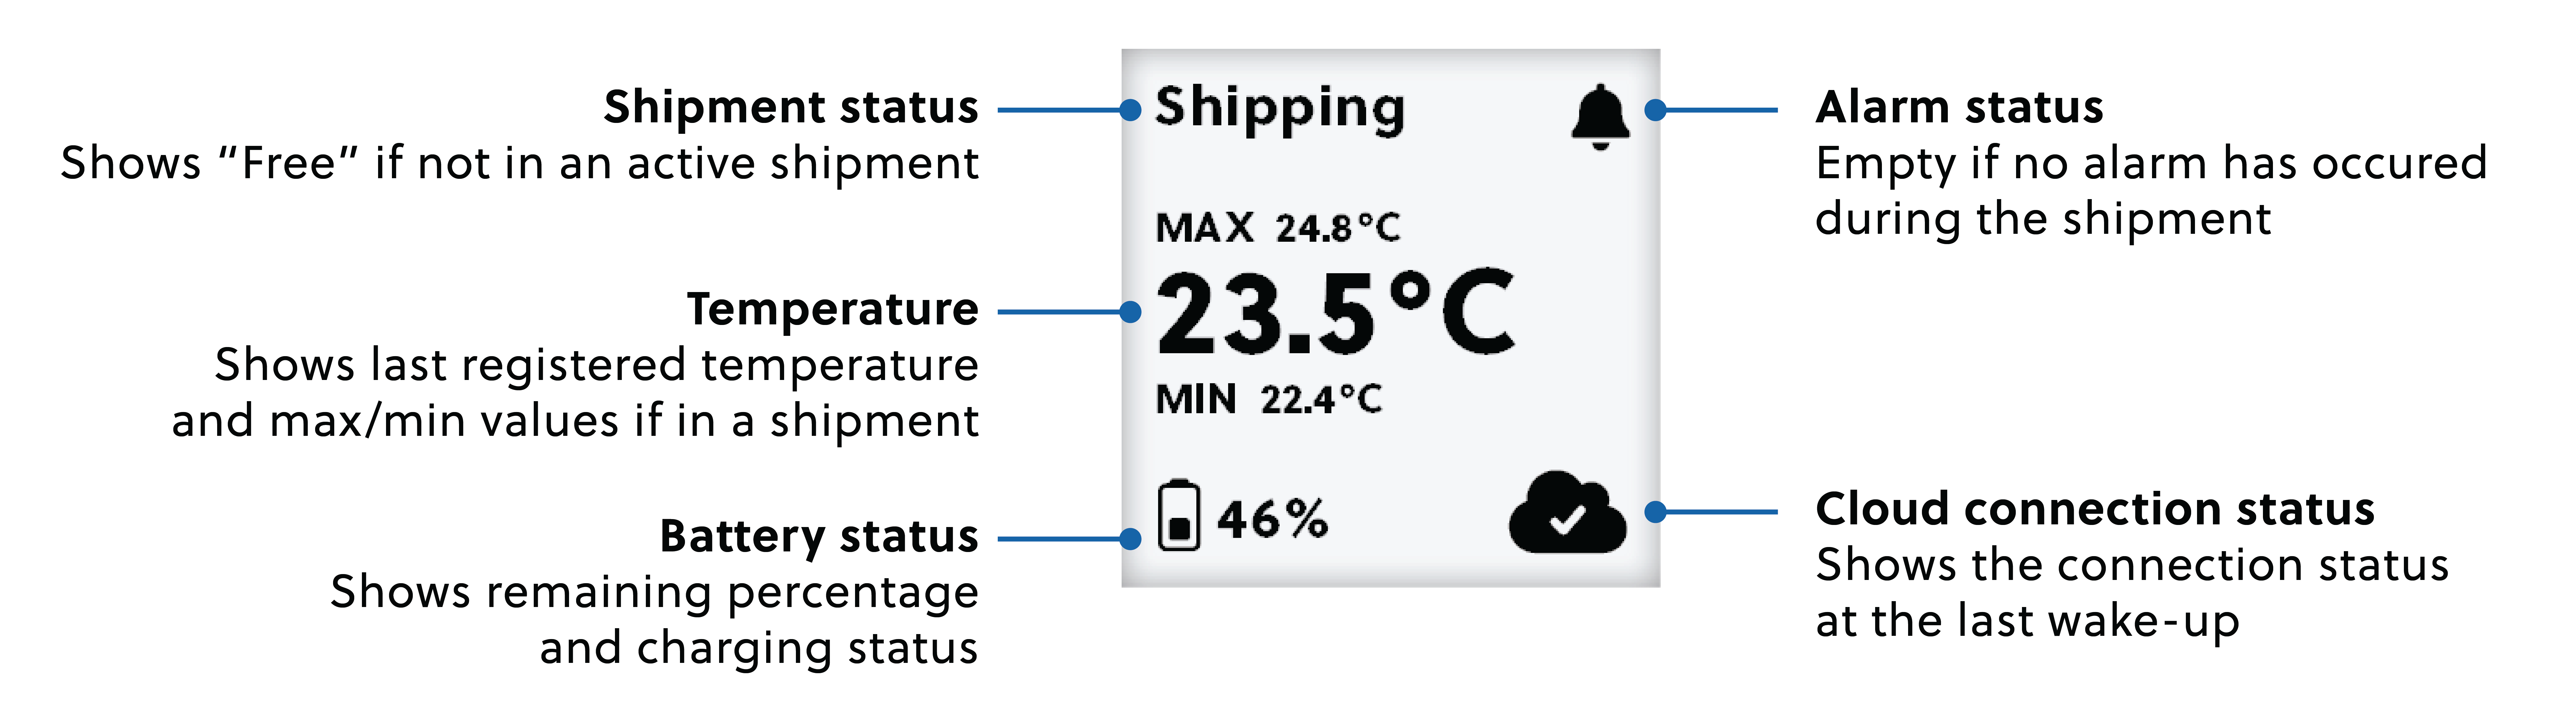 Saga logger display sections shown with arrows and text (battery, temperature, shipment, alarm, cloud connection)